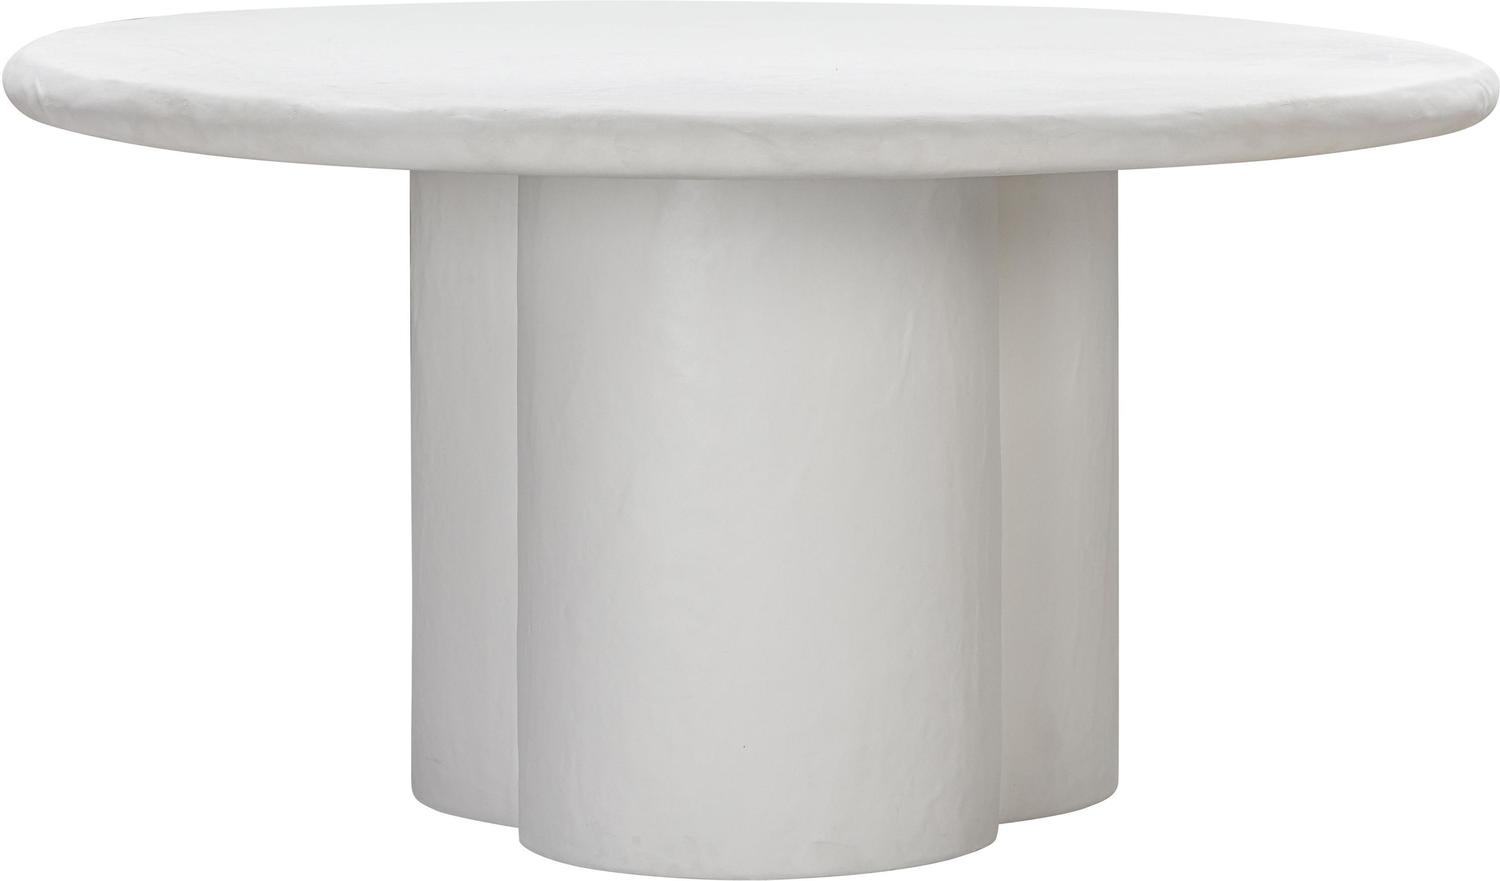 dining table chairs set of 4 Contemporary Design Furniture Dining Tables White